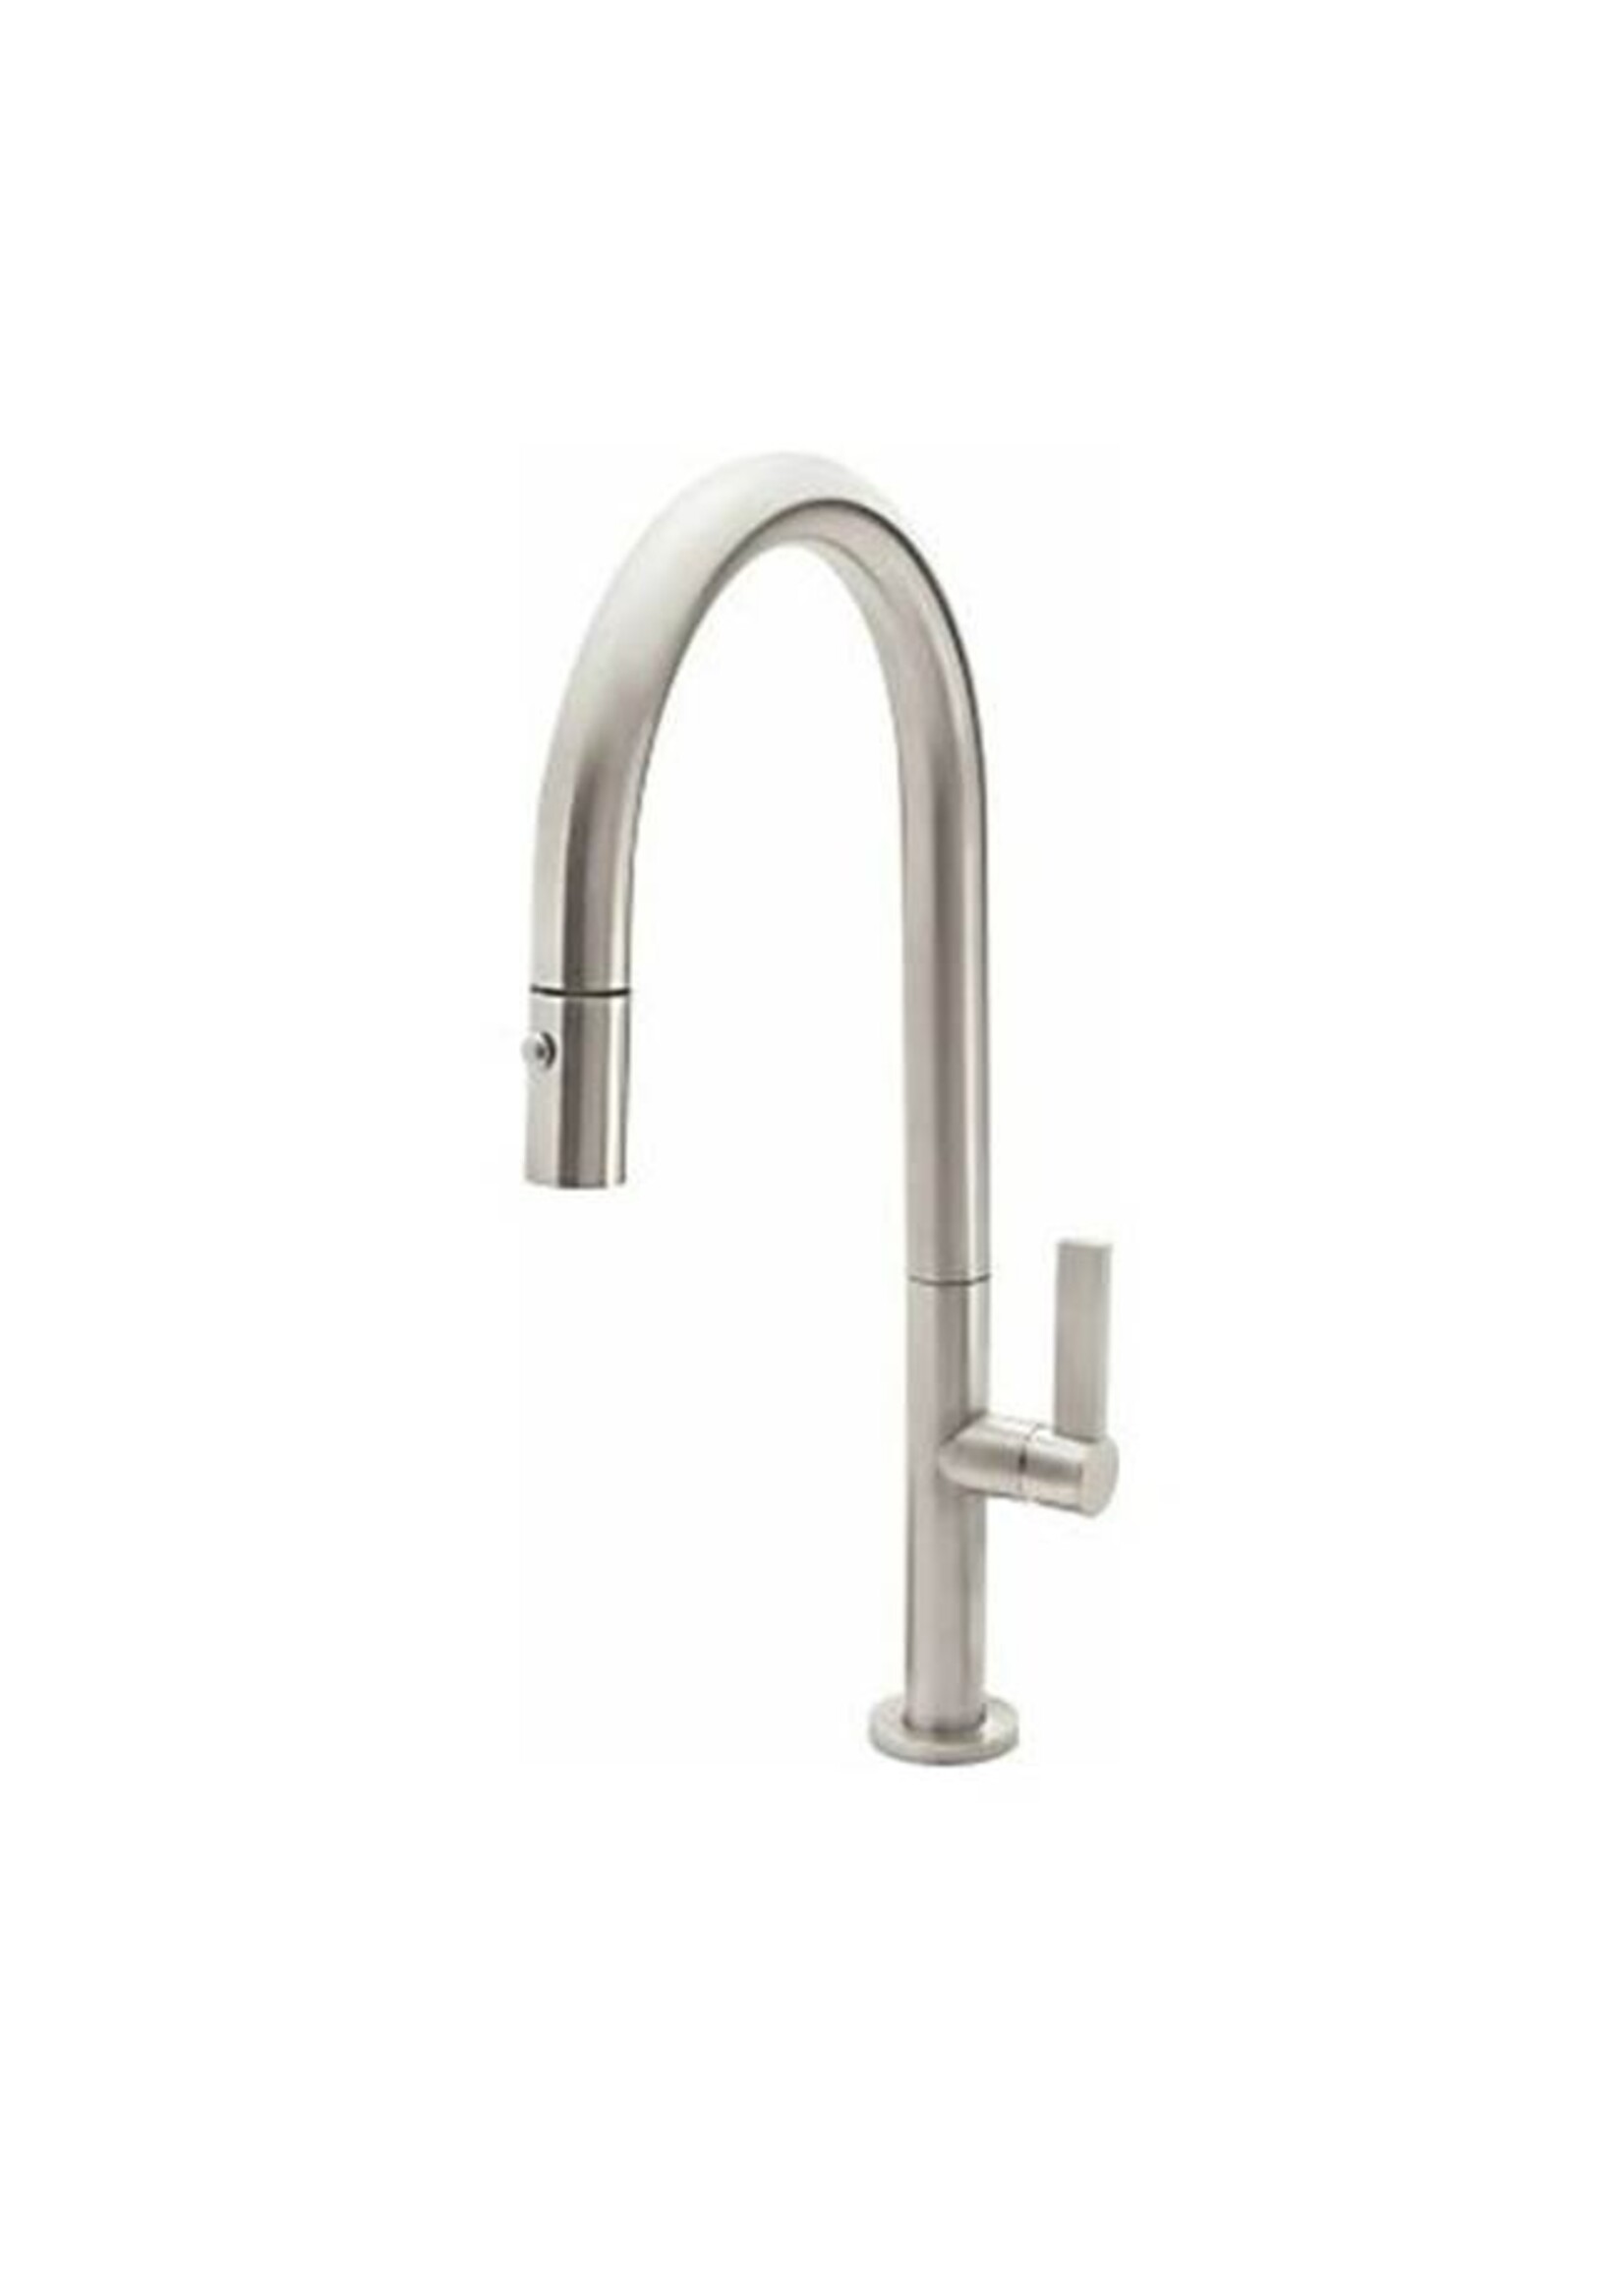 California Faucets California Faucet Poetto Pull-Down Kitchen Faucet - Low Spout (Special Finish)